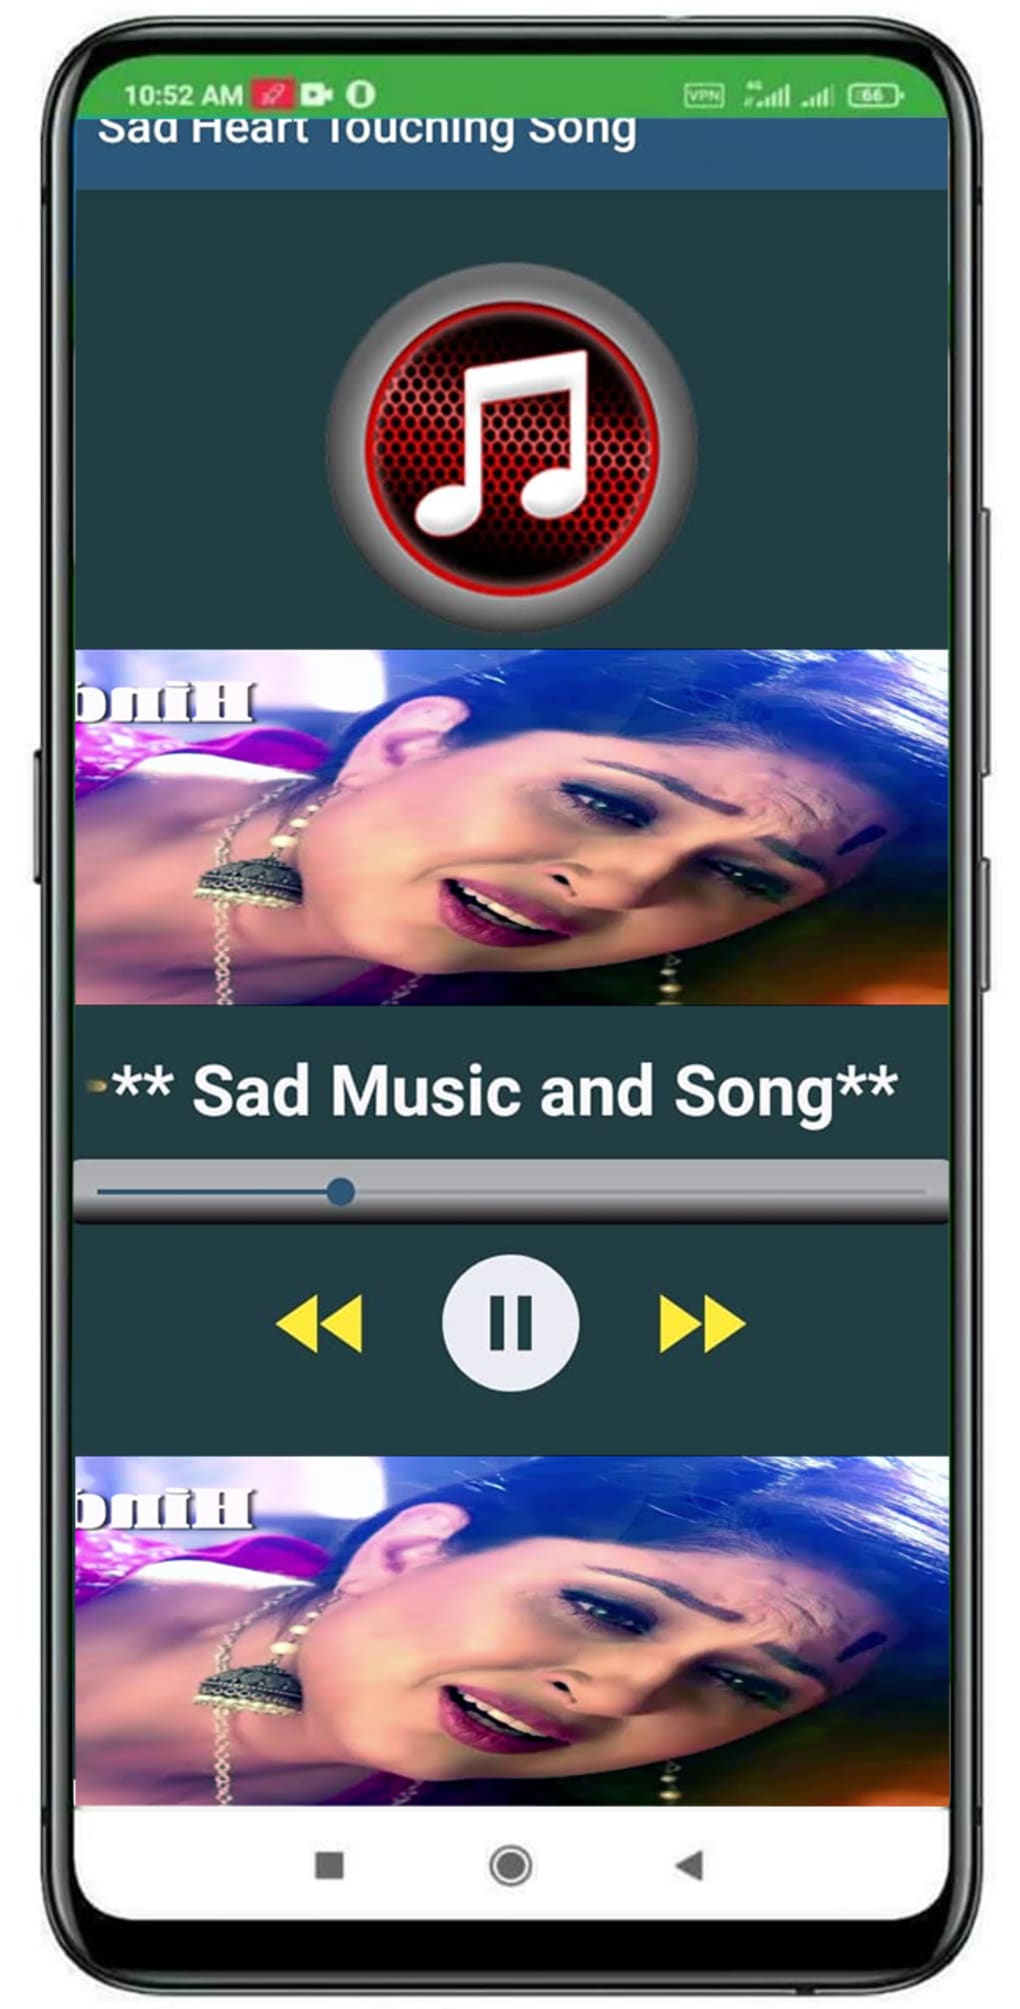 Sad Music Offline::Appstore for Android